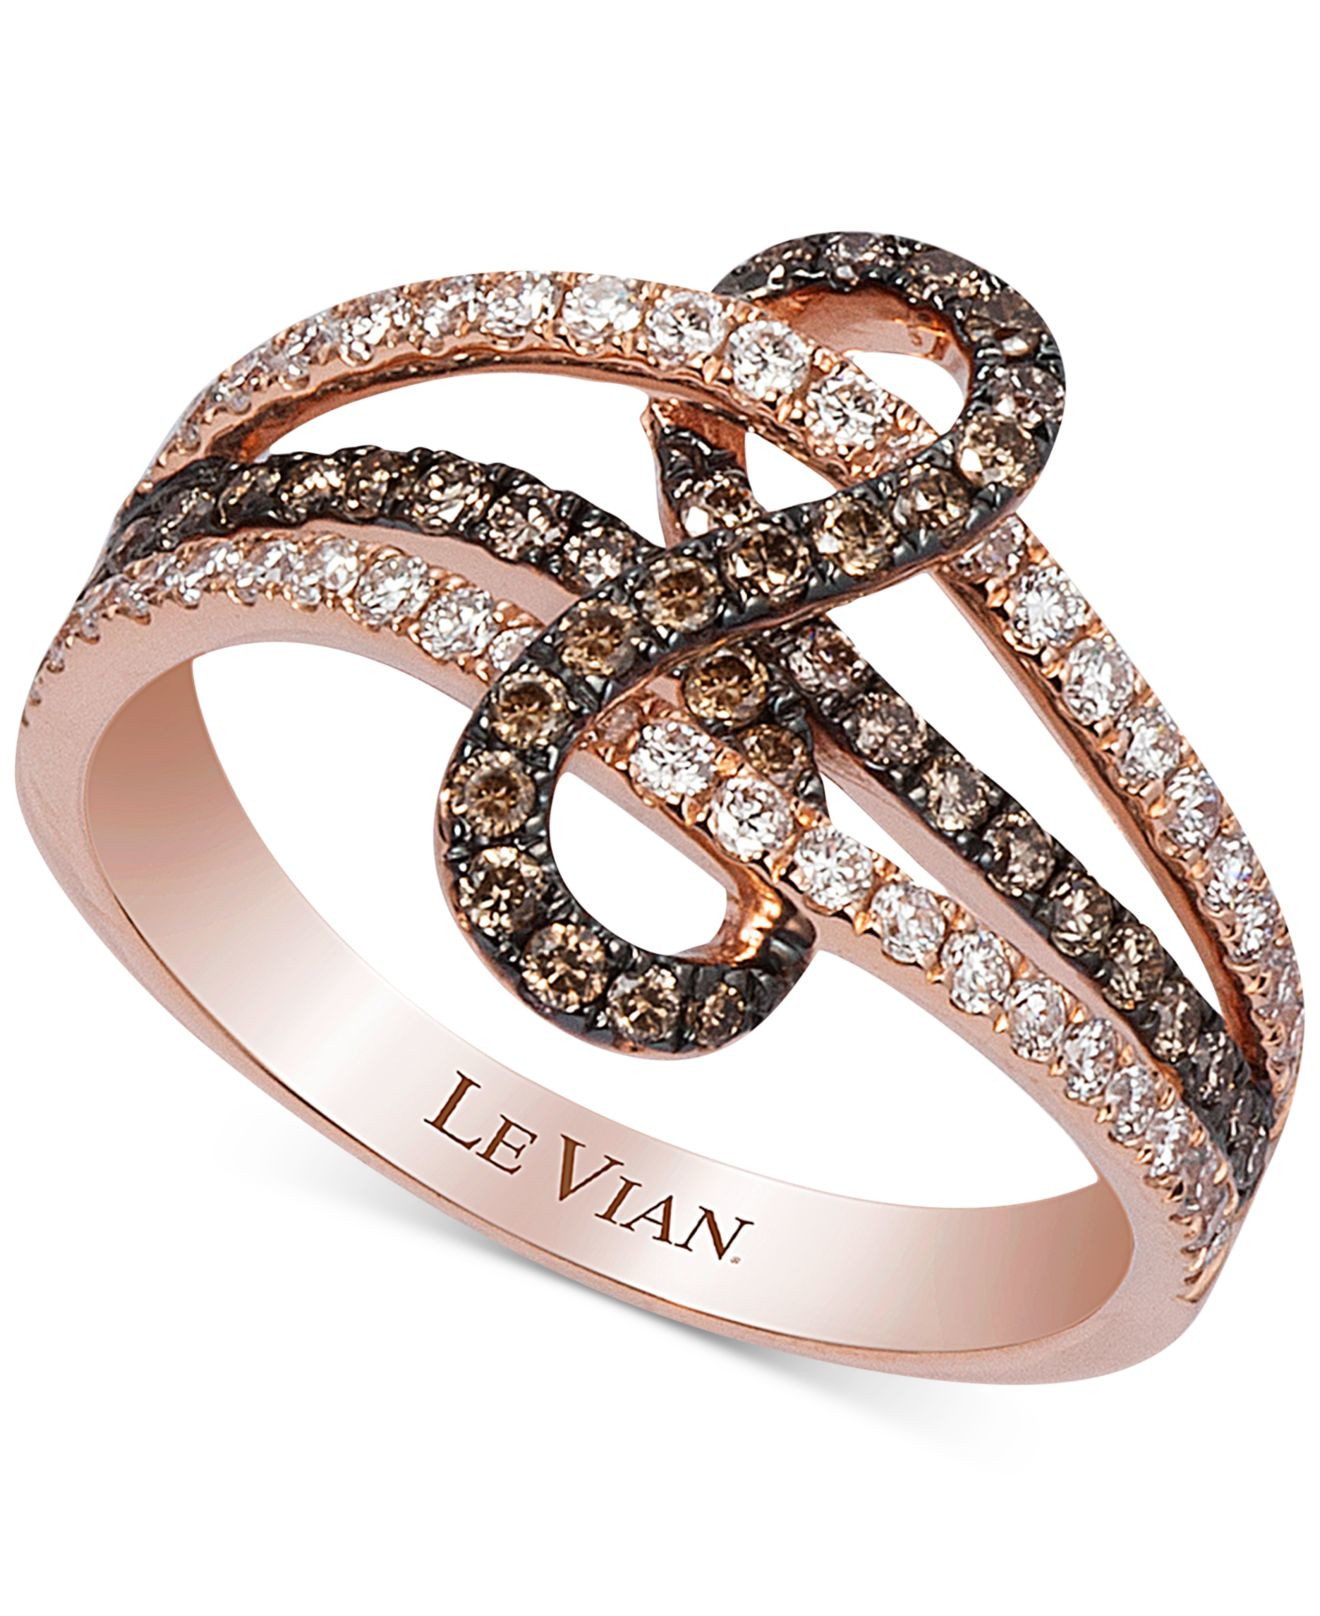 Chocolate Diamond Rings For Sale
 Le vian Chocolatier Gladiator Weave White And Chocolate